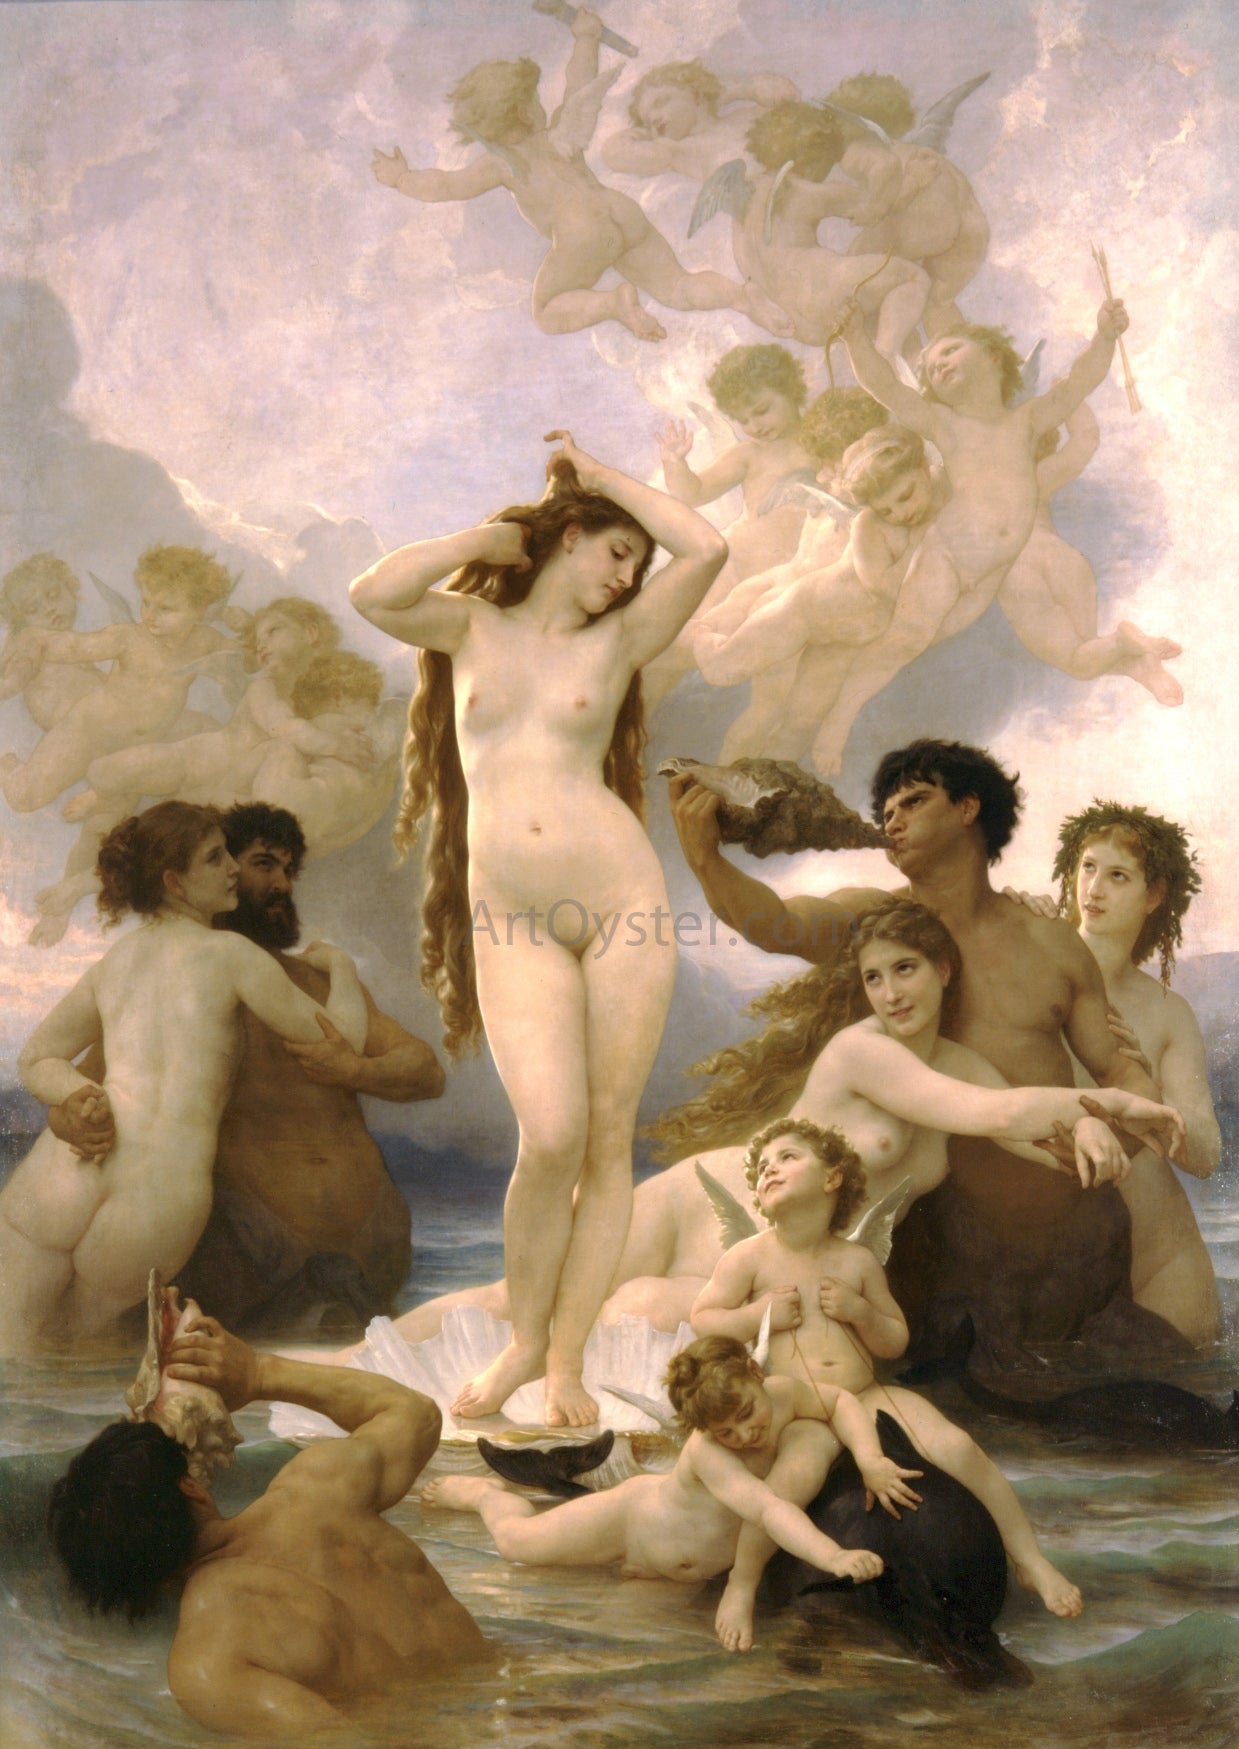  William Adolphe Bouguereau The Birth of Venus - Hand Painted Oil Painting